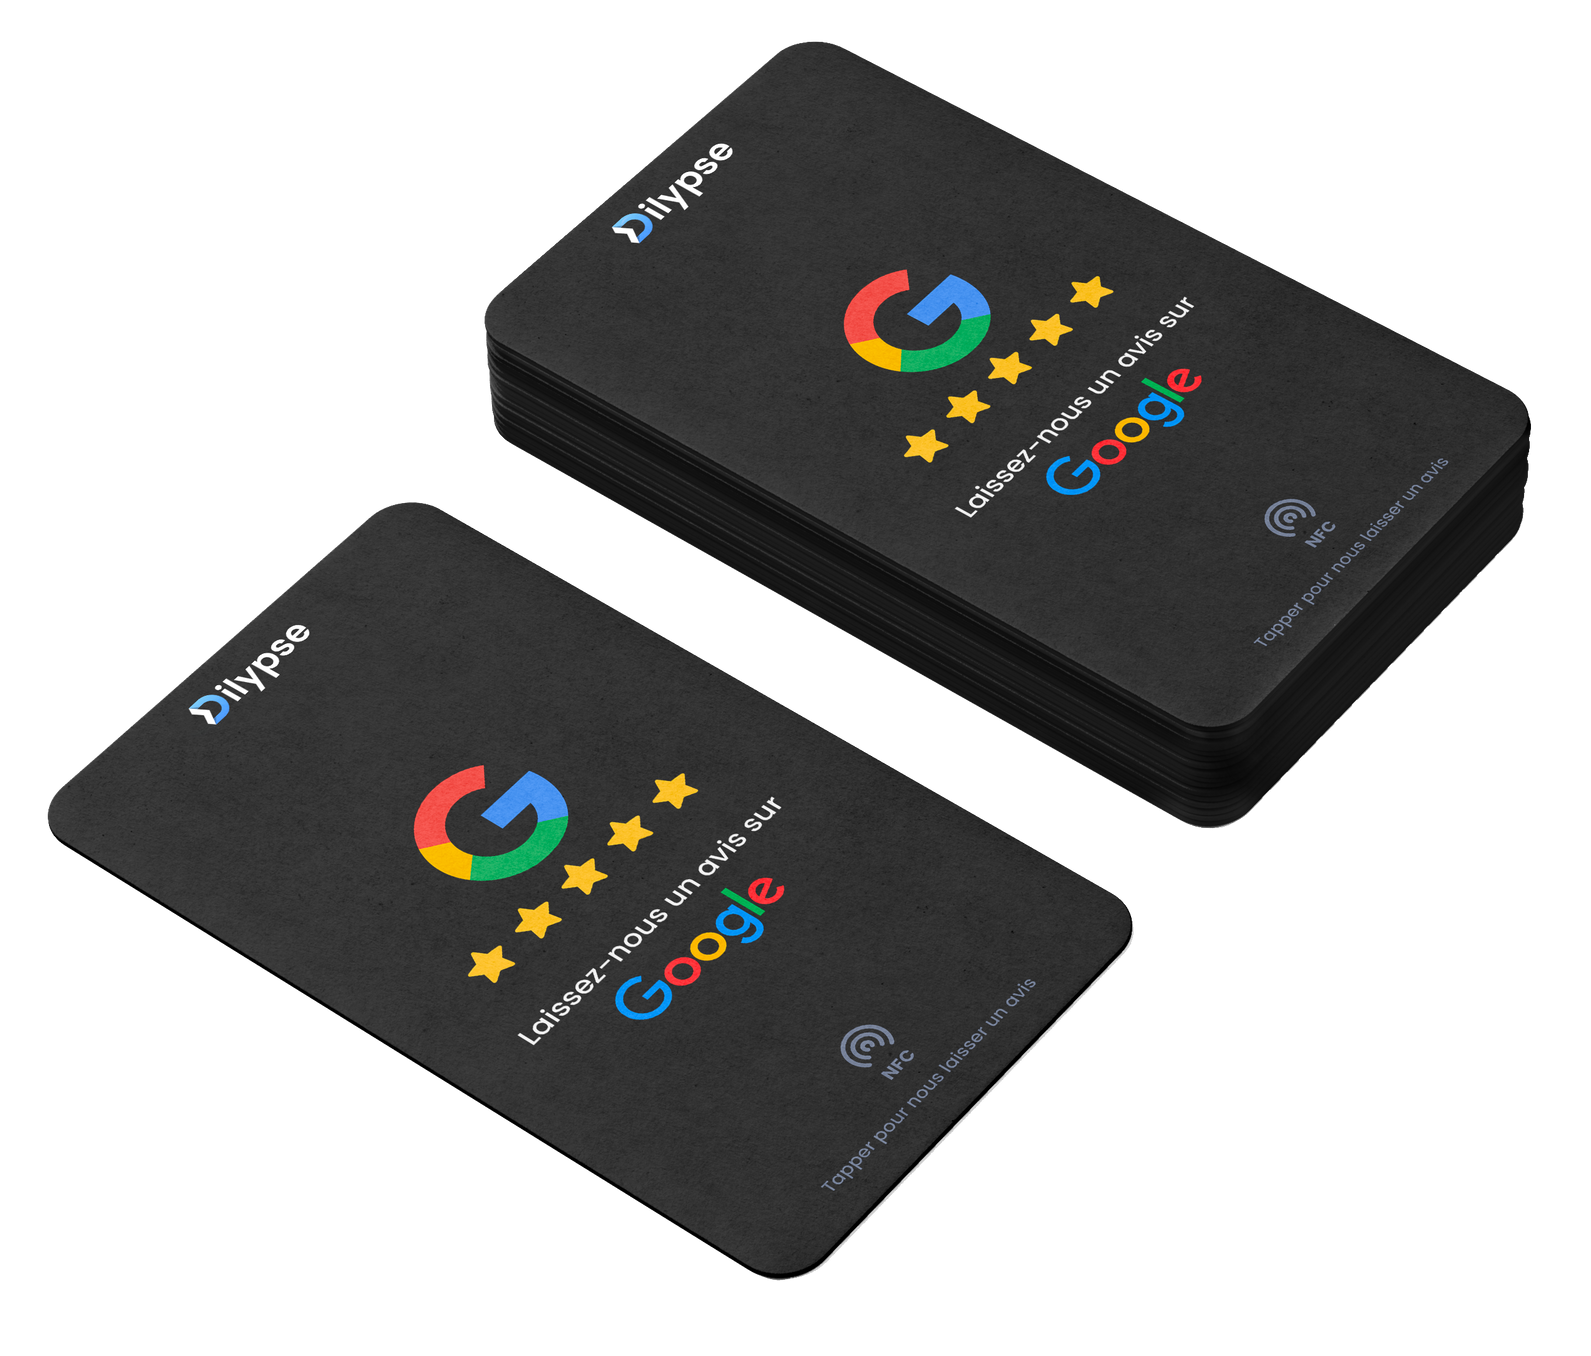 Two business cards with the google logo on them